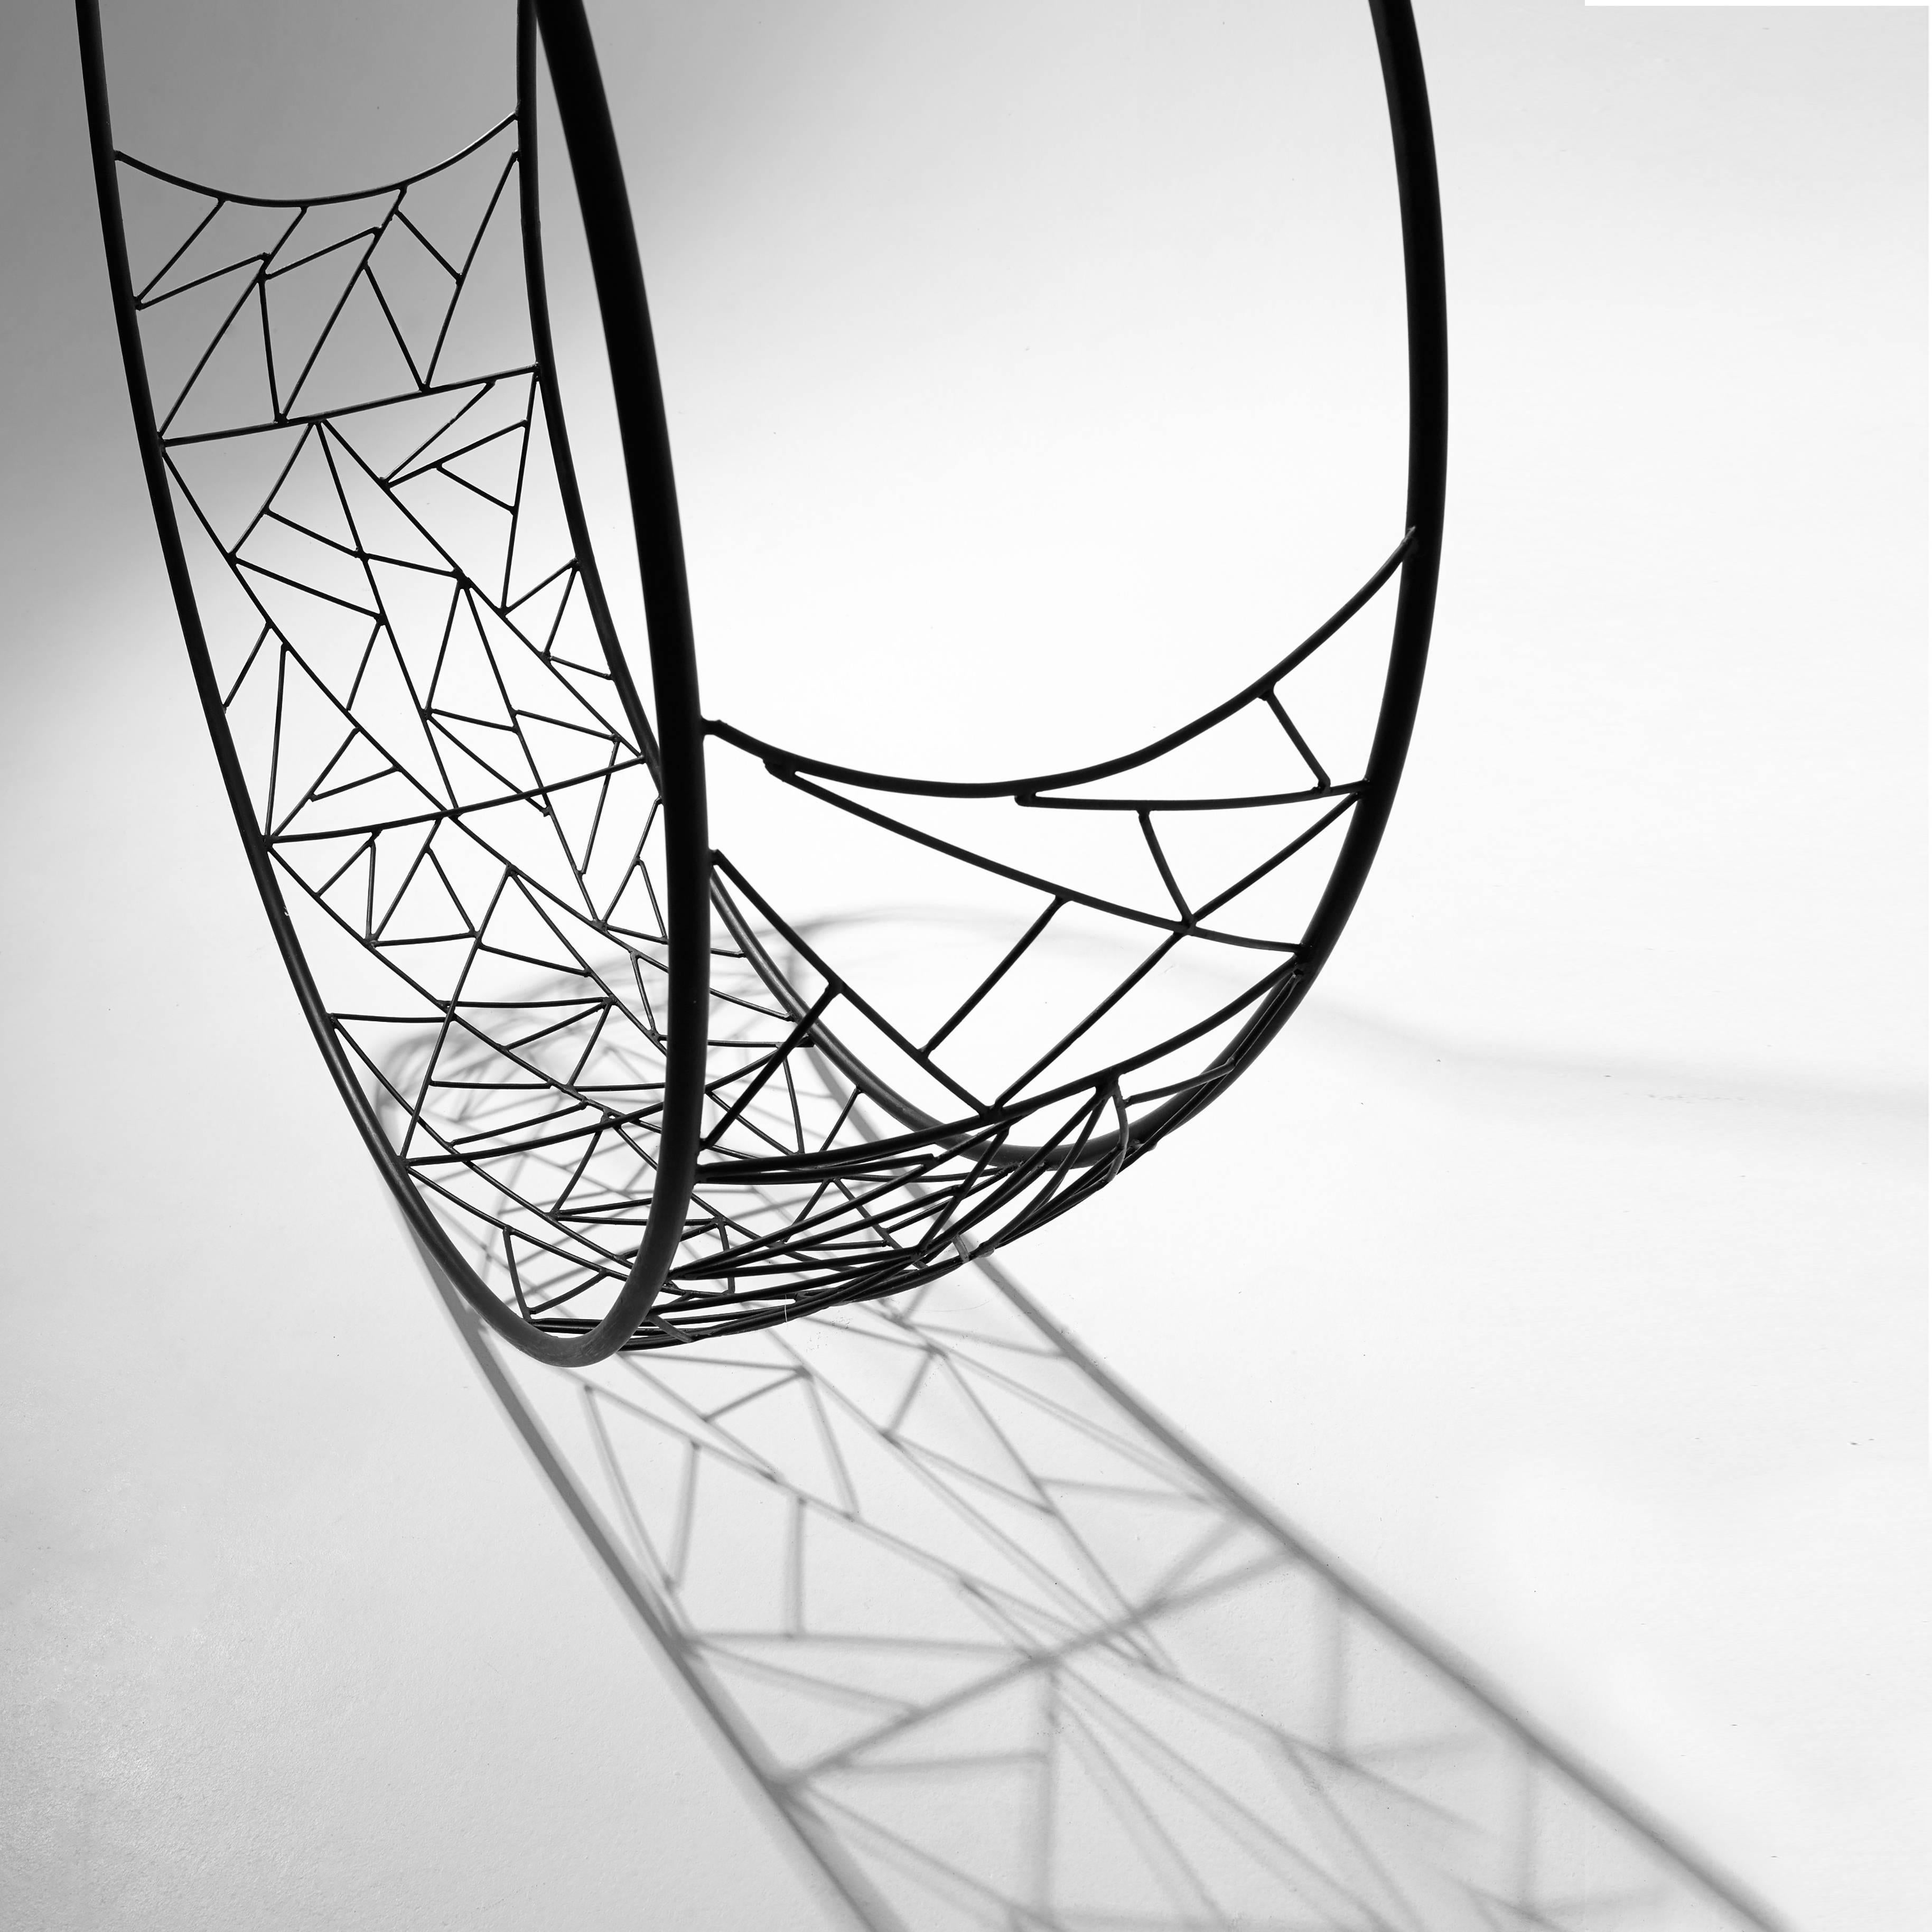 The wheel hanging swing chair is sculptural and dynamic. Its striking circular shape lends itself for use as a functional art piece.
The pattern detail is inspired by nature and reminiscent of the veins in leaves, tree branches intersecting, the